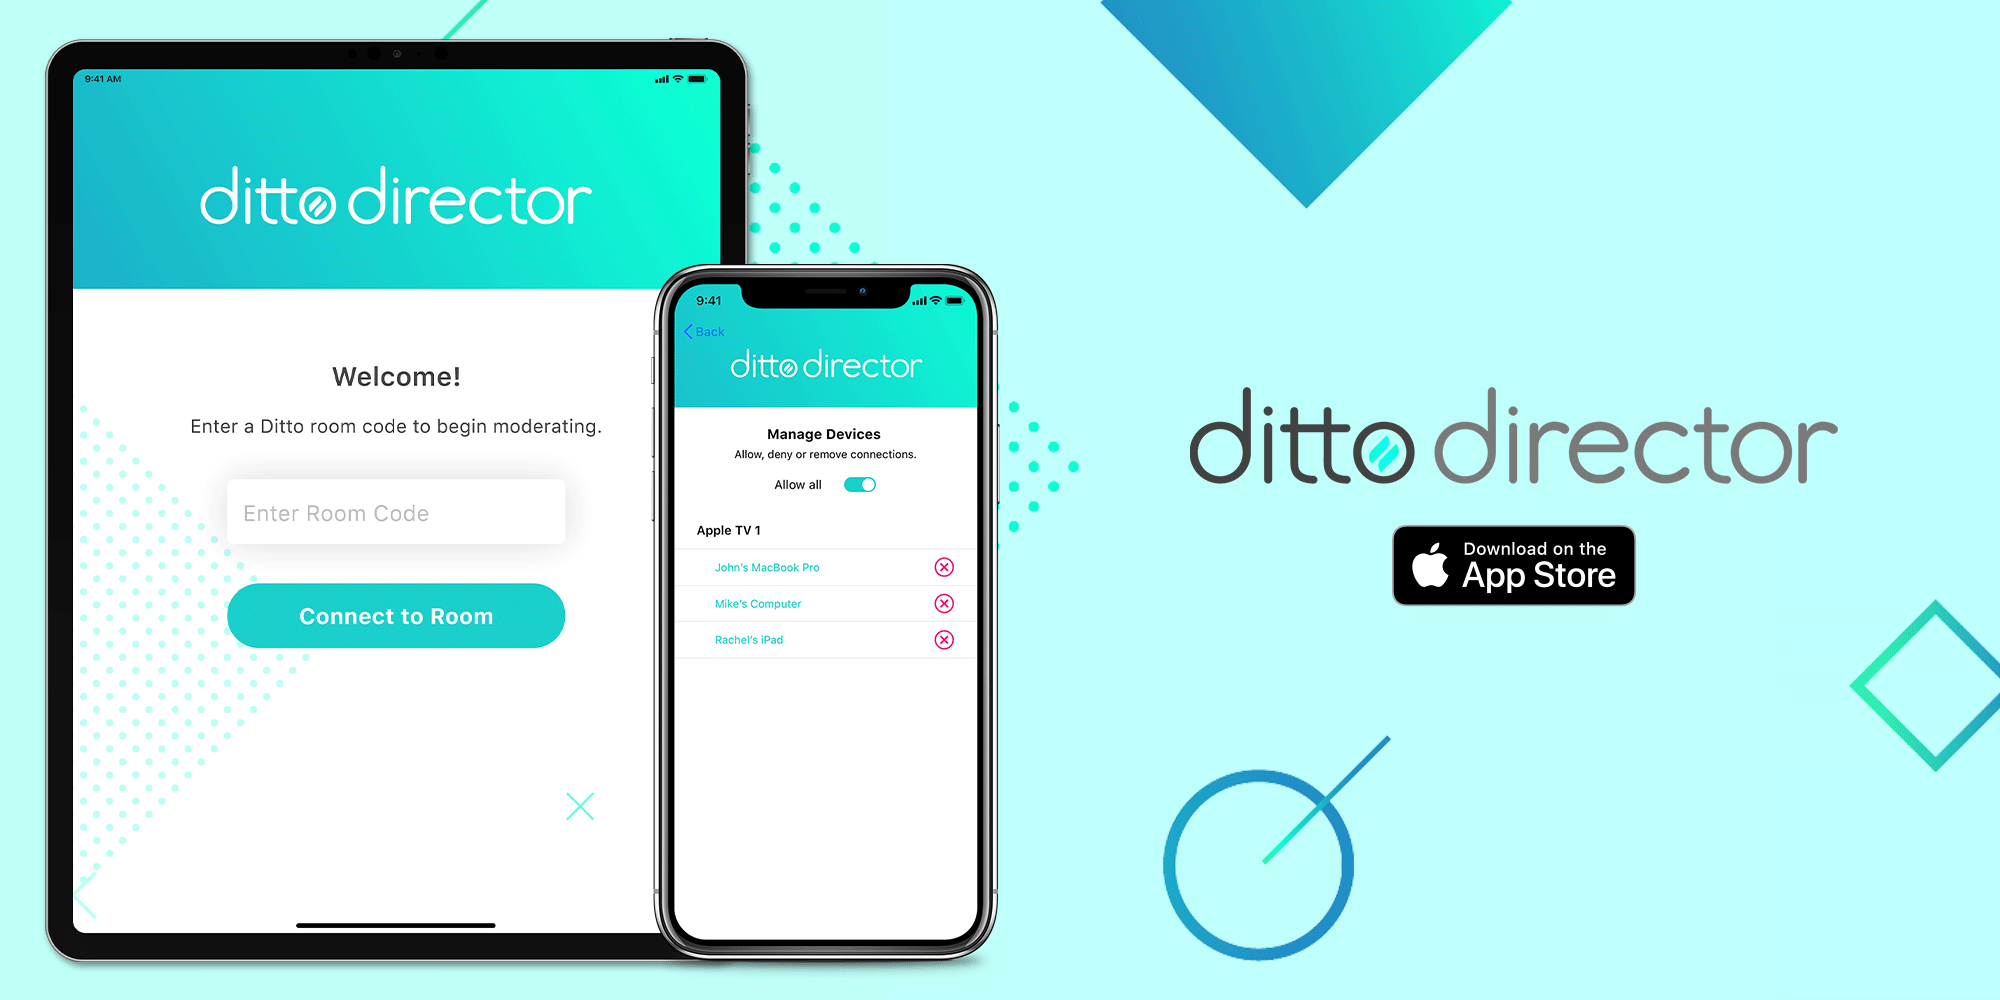 New Ditto Director App Arrives On iPhone and iPad - Featured Image